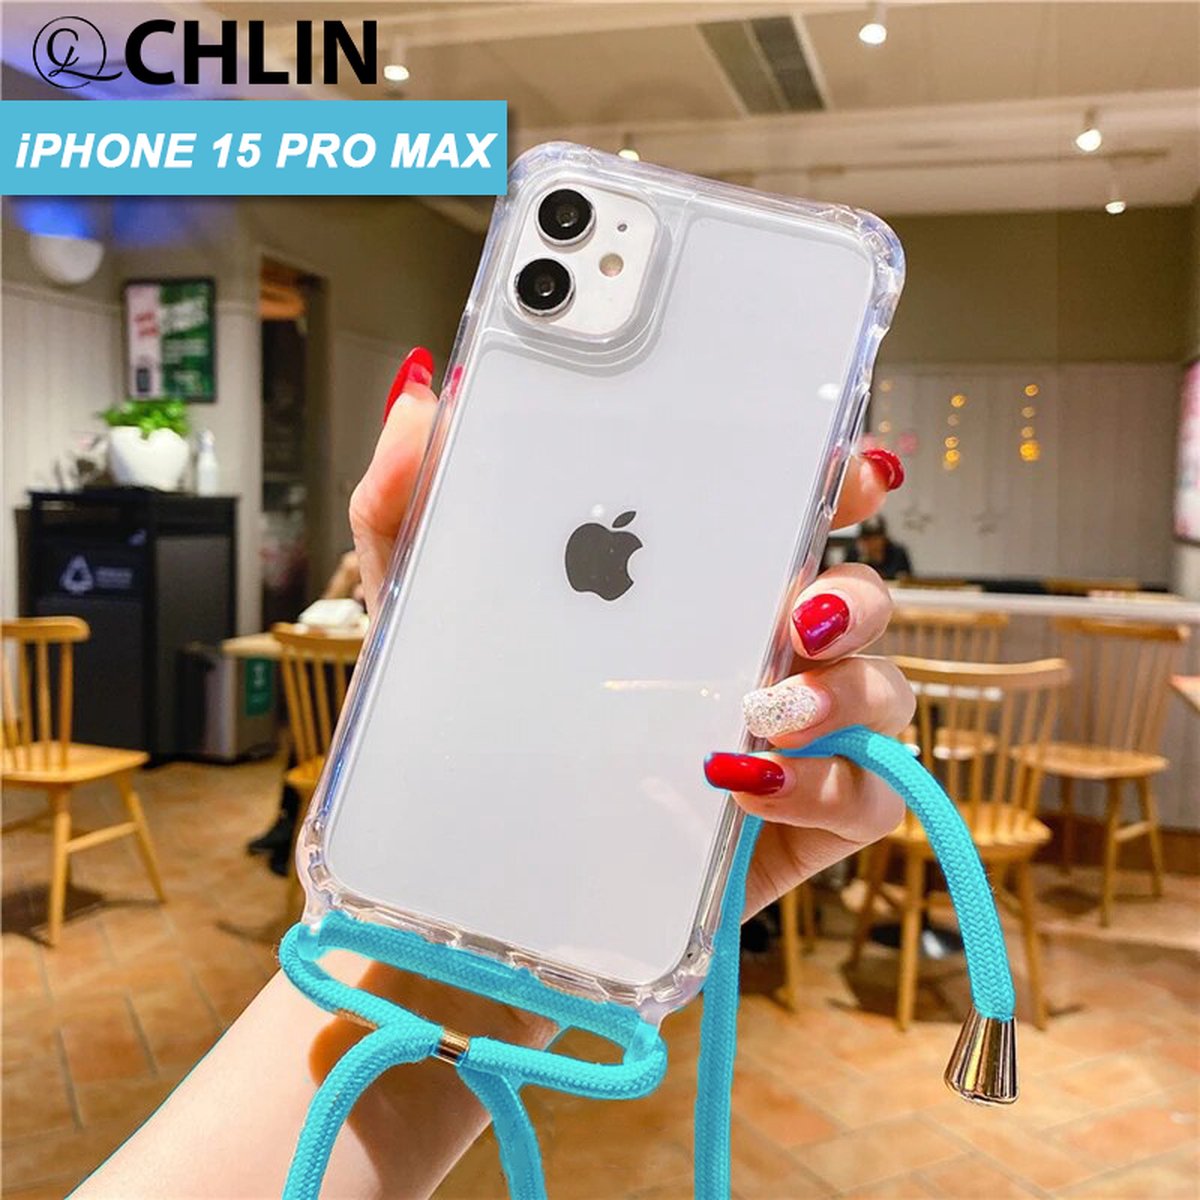 CL CHLIN® - iPhone 15 Pro transparant hoesje met BLAUW koord - Hoesje met koord iPhone 15 Pro - iPhone 15 Pro case - iPhone 15 Pro hoes - iPhone hoesje met cord - iPhone 15 Pro bescherming - iPhone 15 Pro protector.